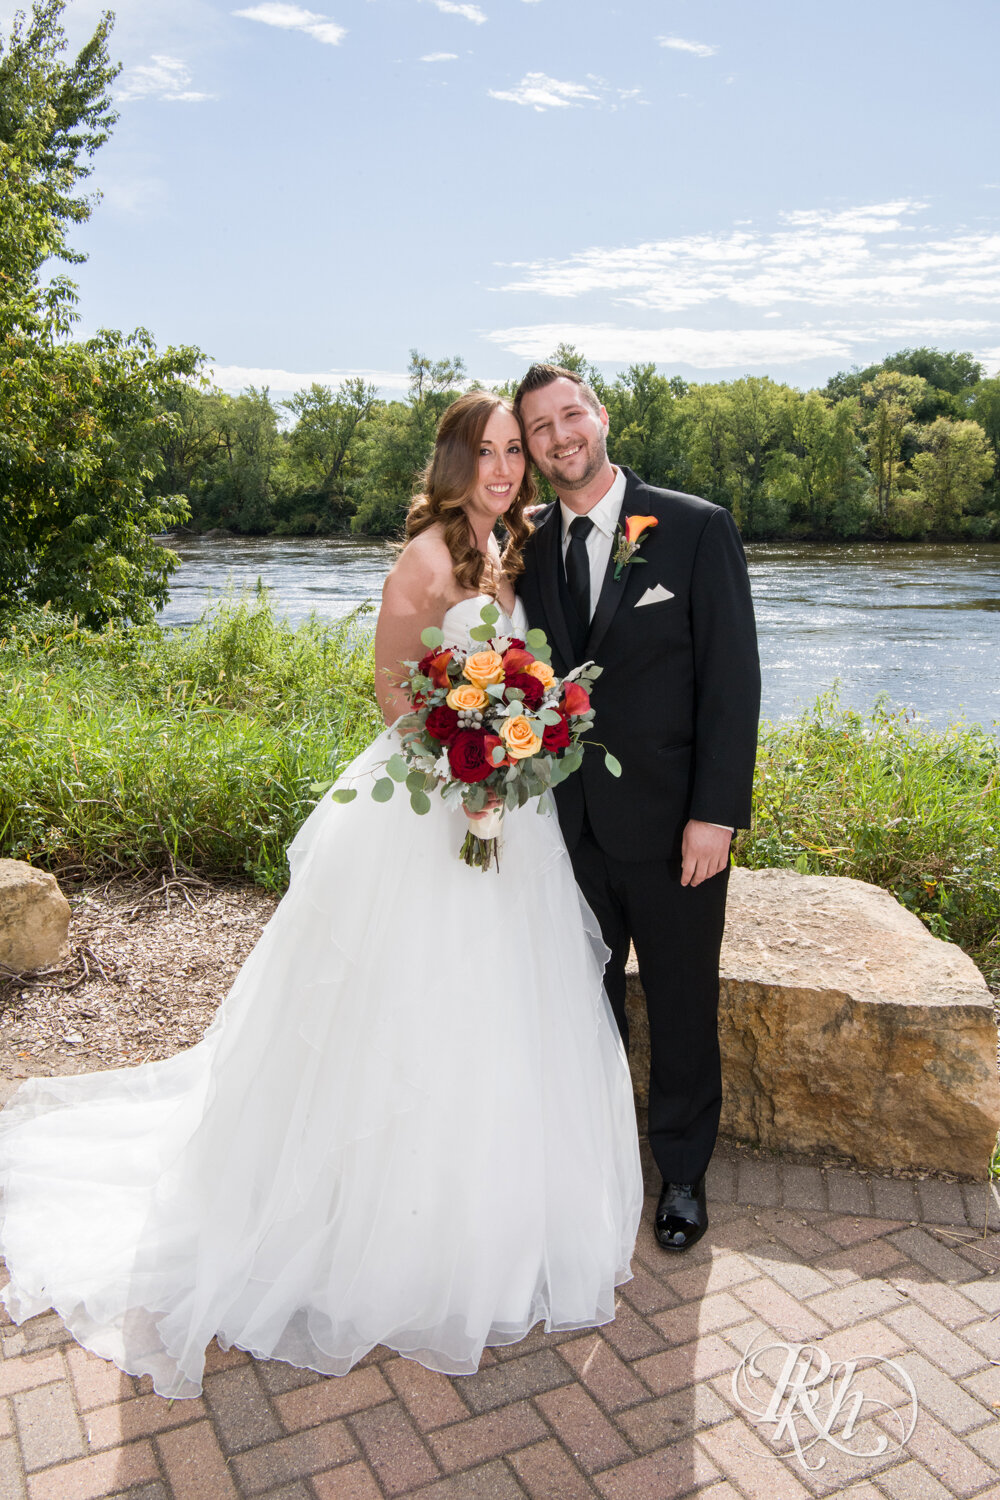 Bride and groom smiling in front of lake in Otsego, Minnesota on sunny wedding day.